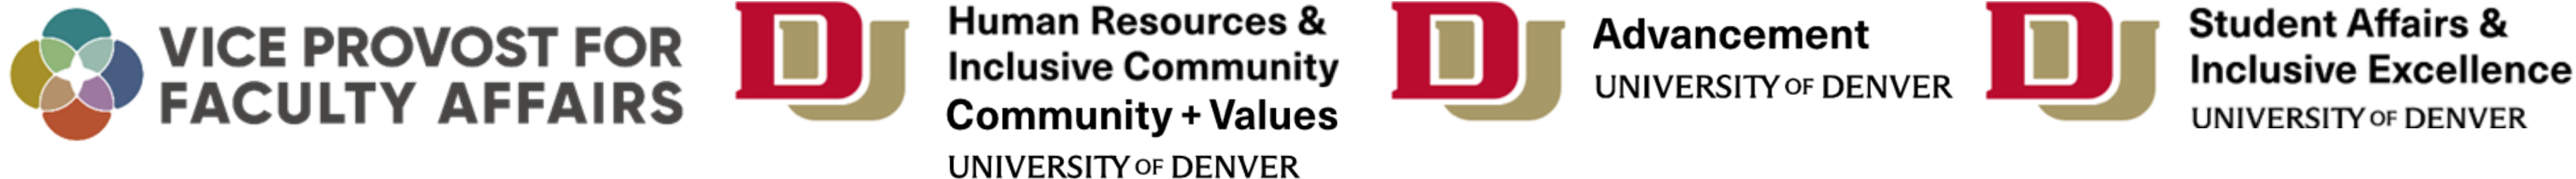 Logos: Vice Provost of Faculty Affairs & Human Resources & Inclusive Community, Community + Values